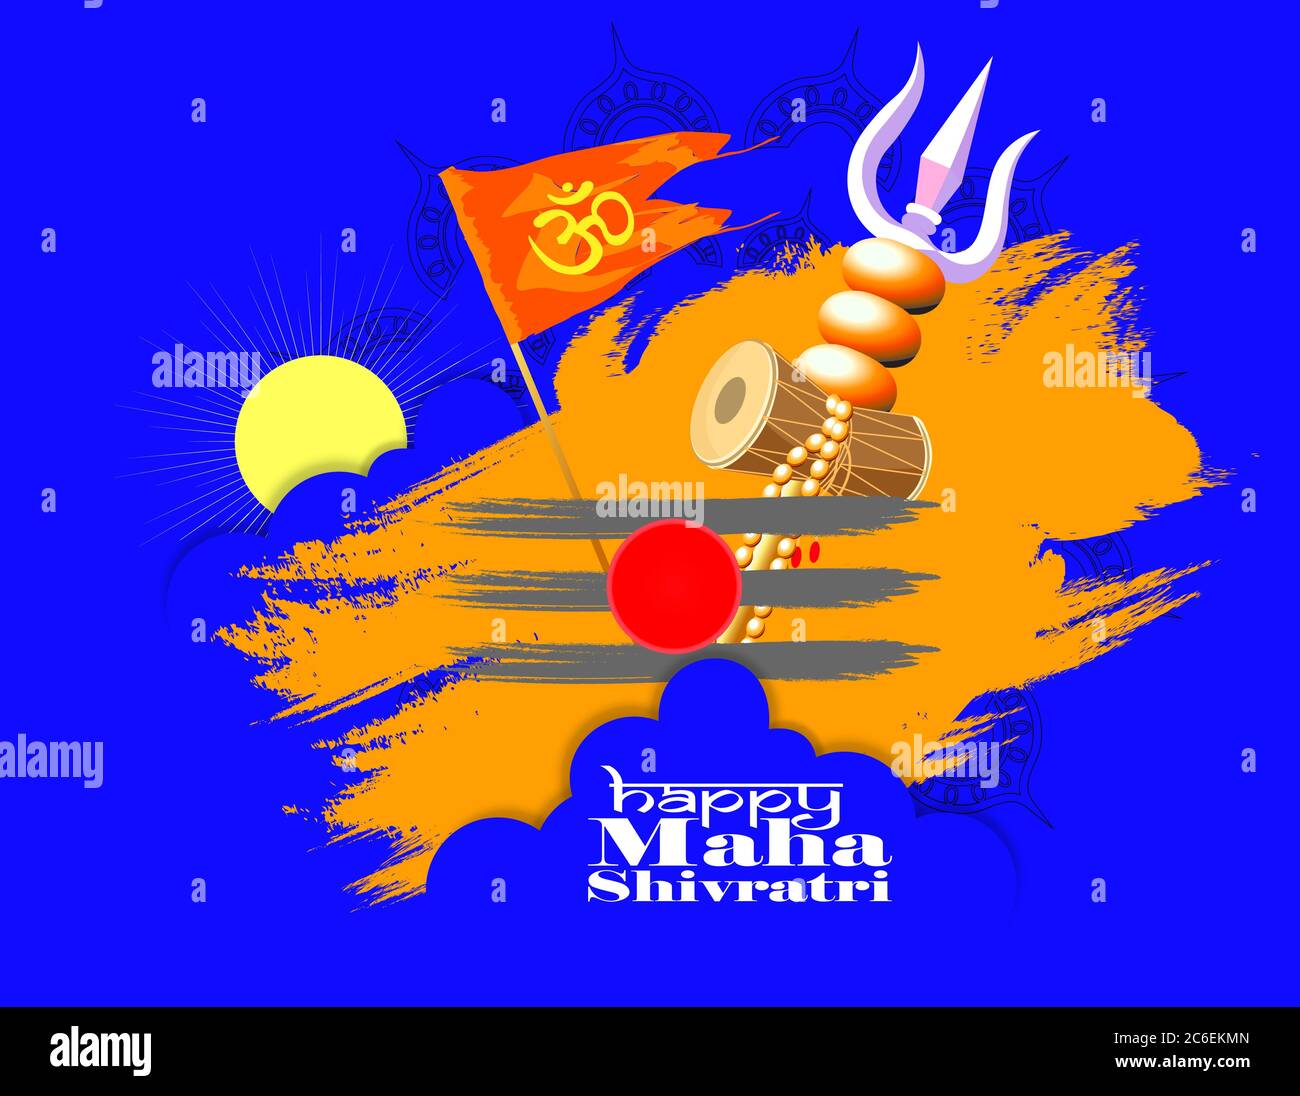 Vector Illustration Of Greeting Card For Maha Shivratri Greeting Card For Hindu Festival Maha 7329